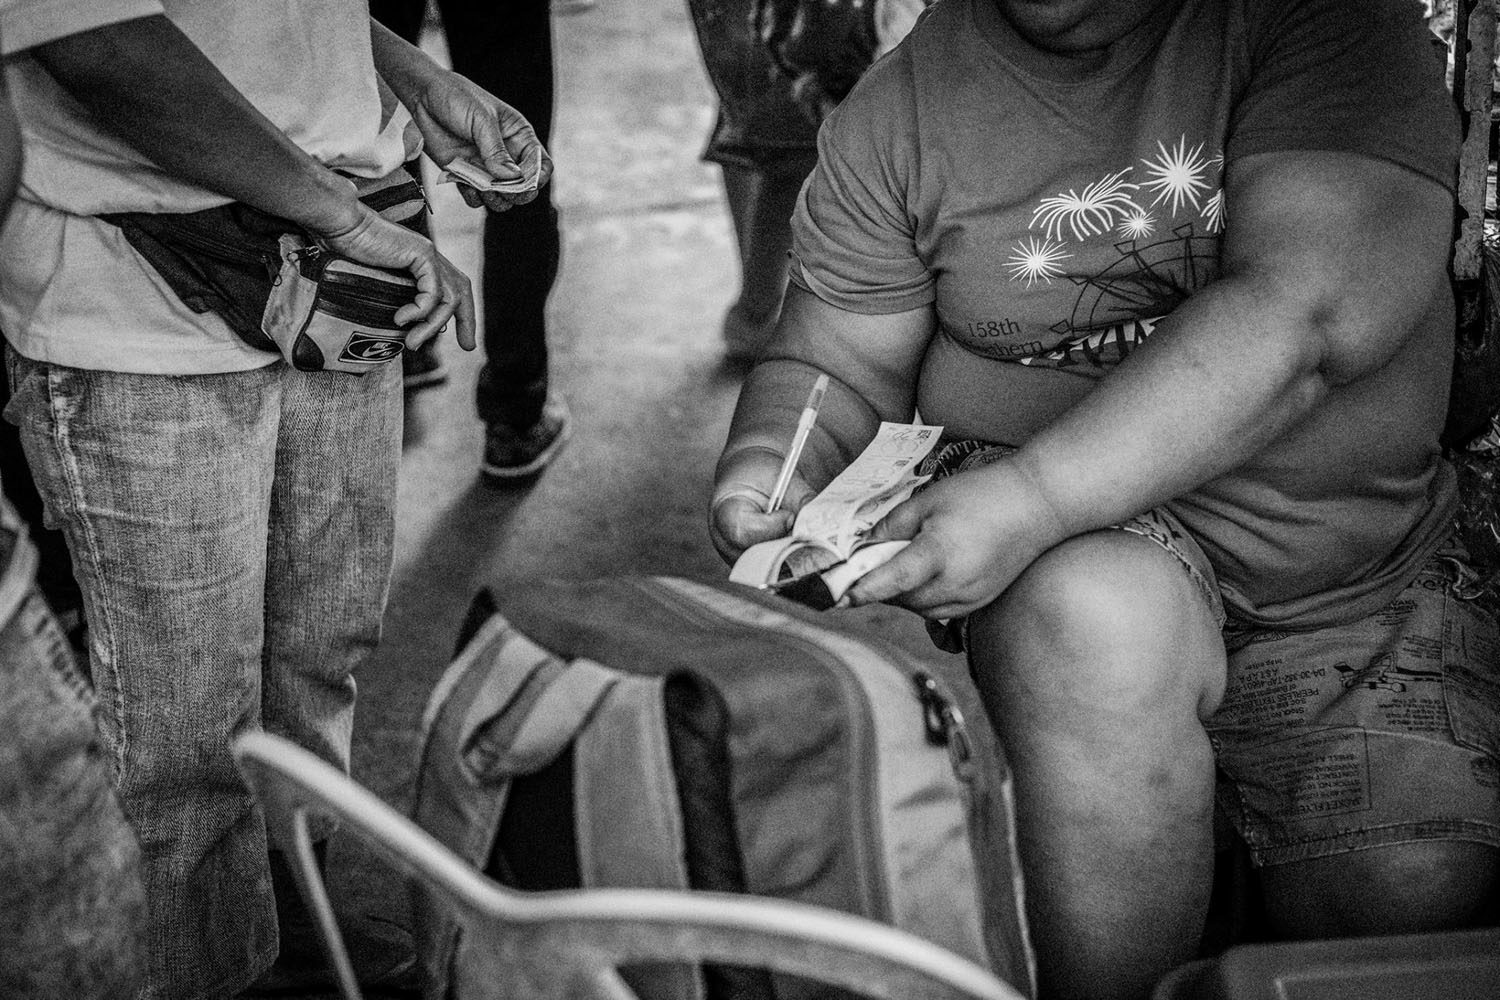 JUETENG COLLECTOR. Jueteng, an illegal numbers game, is played in many parts of the Philippines and has been a source of additional income for rural families. Photo by Rick Rocamora